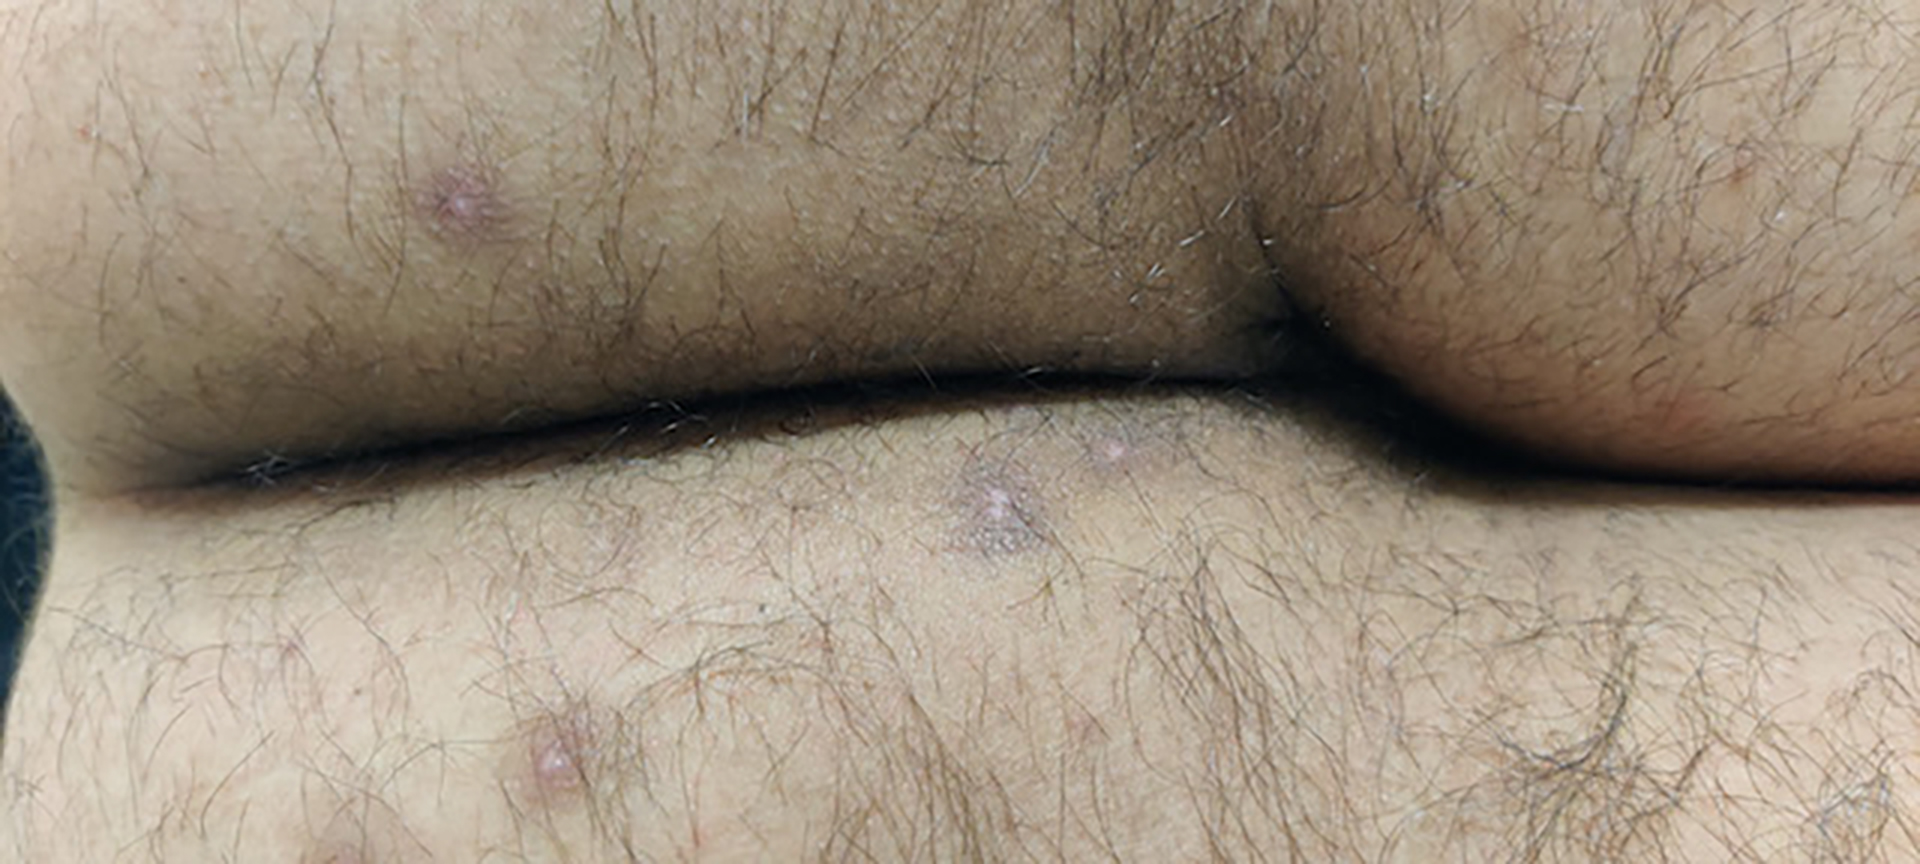 Primary perianal healed lesions